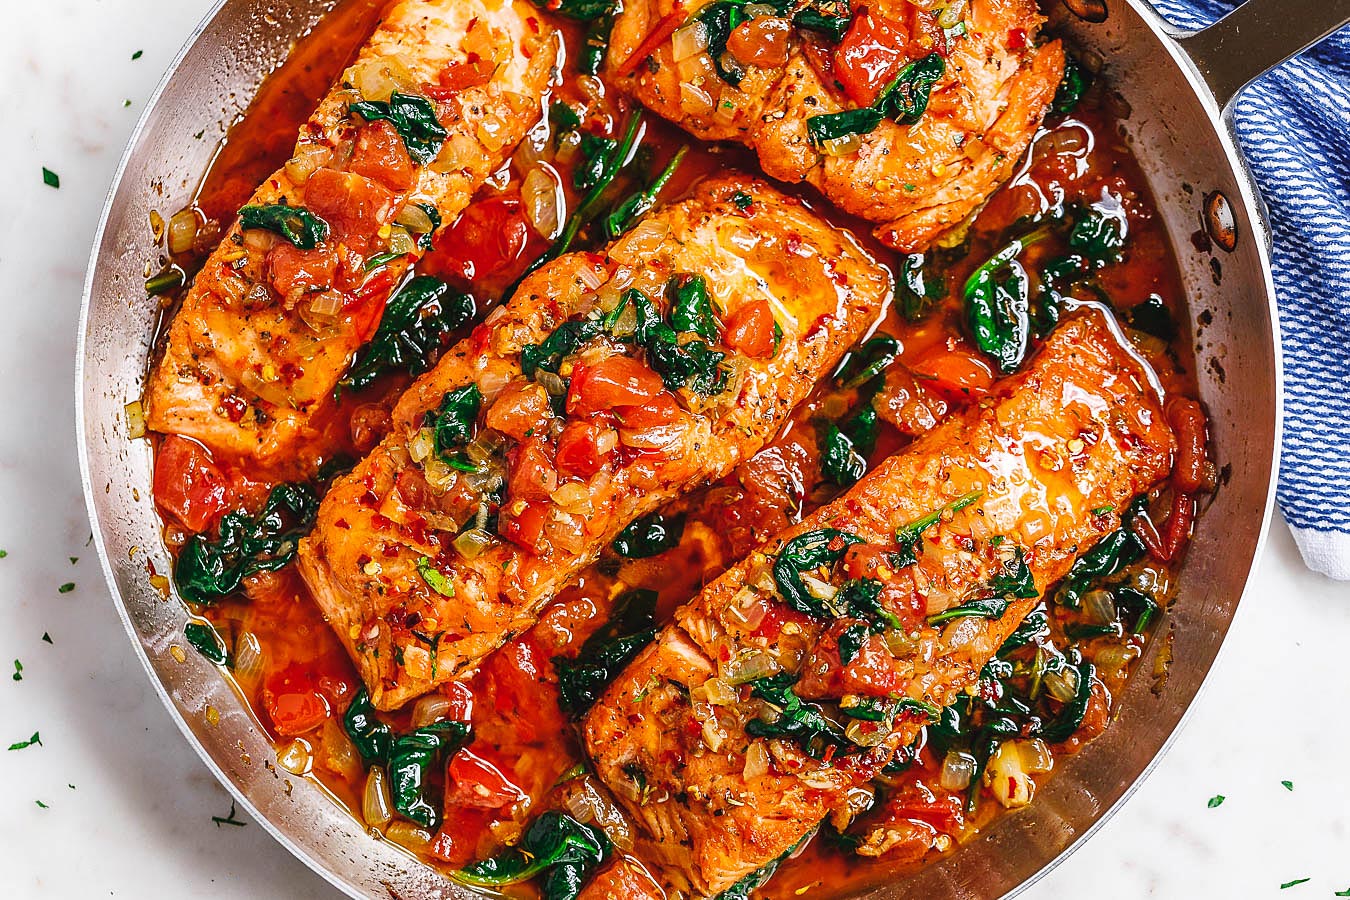 Tuscan Garlic Salmon Skillet with Spinach and Tomato